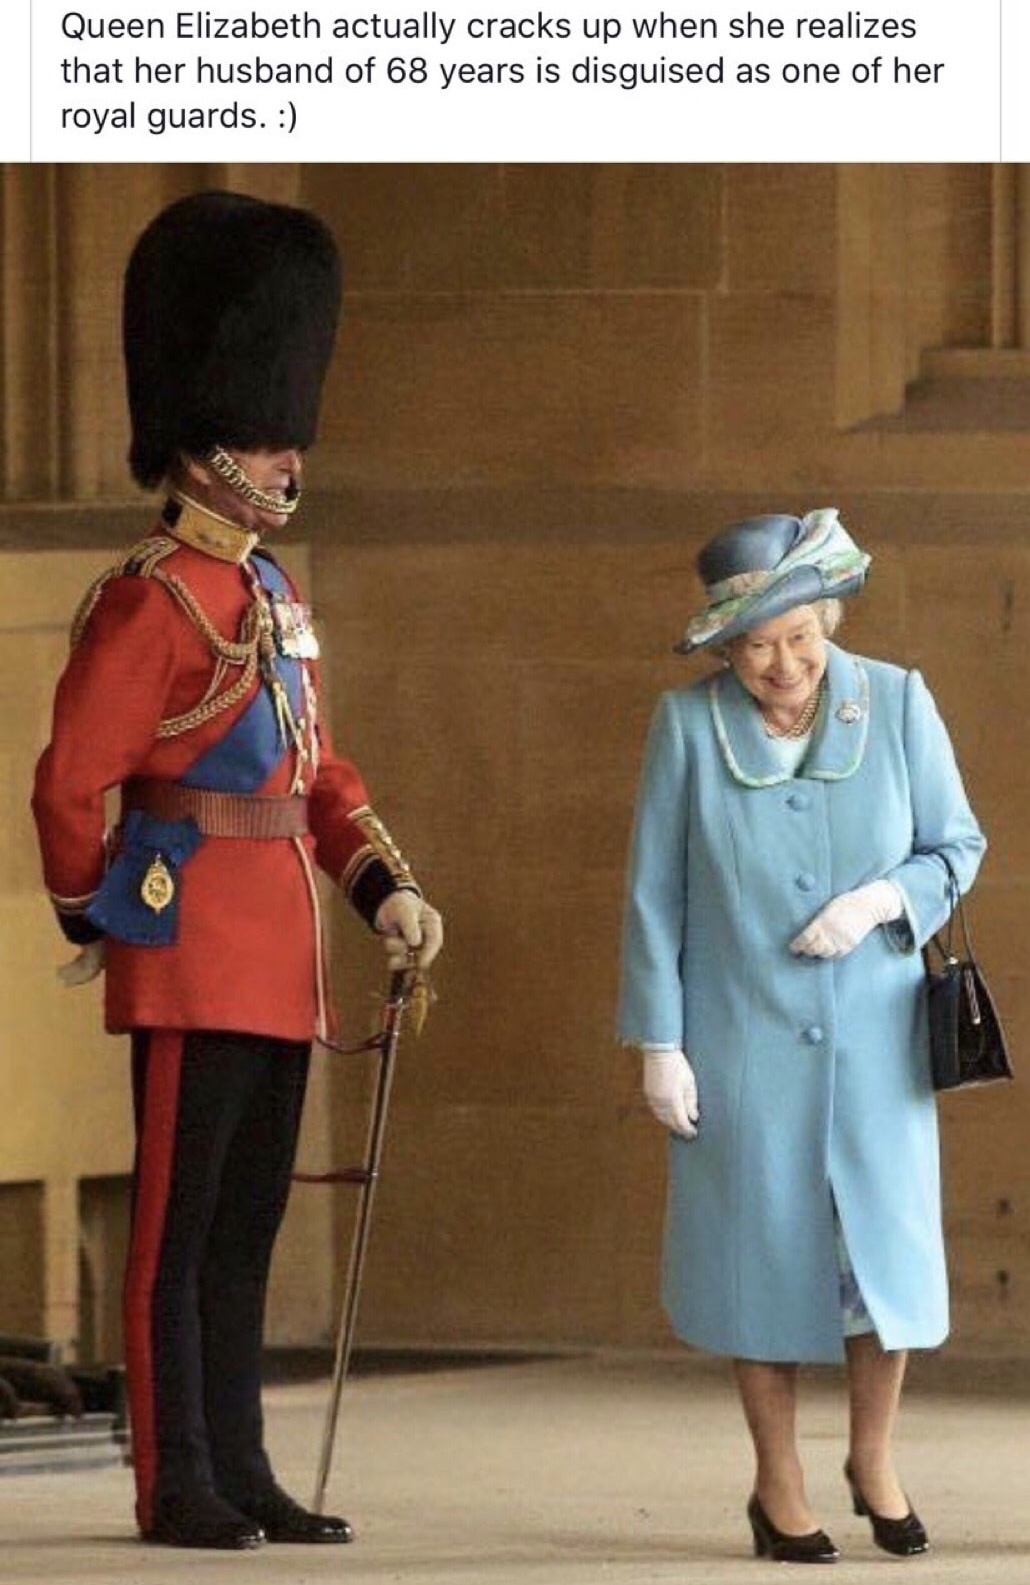 meme stream - prince philip uniform queen elizabeth - Queen Elizabeth actually cracks up when she realizes that her husband of 68 years is disguised as one of her royal guards.